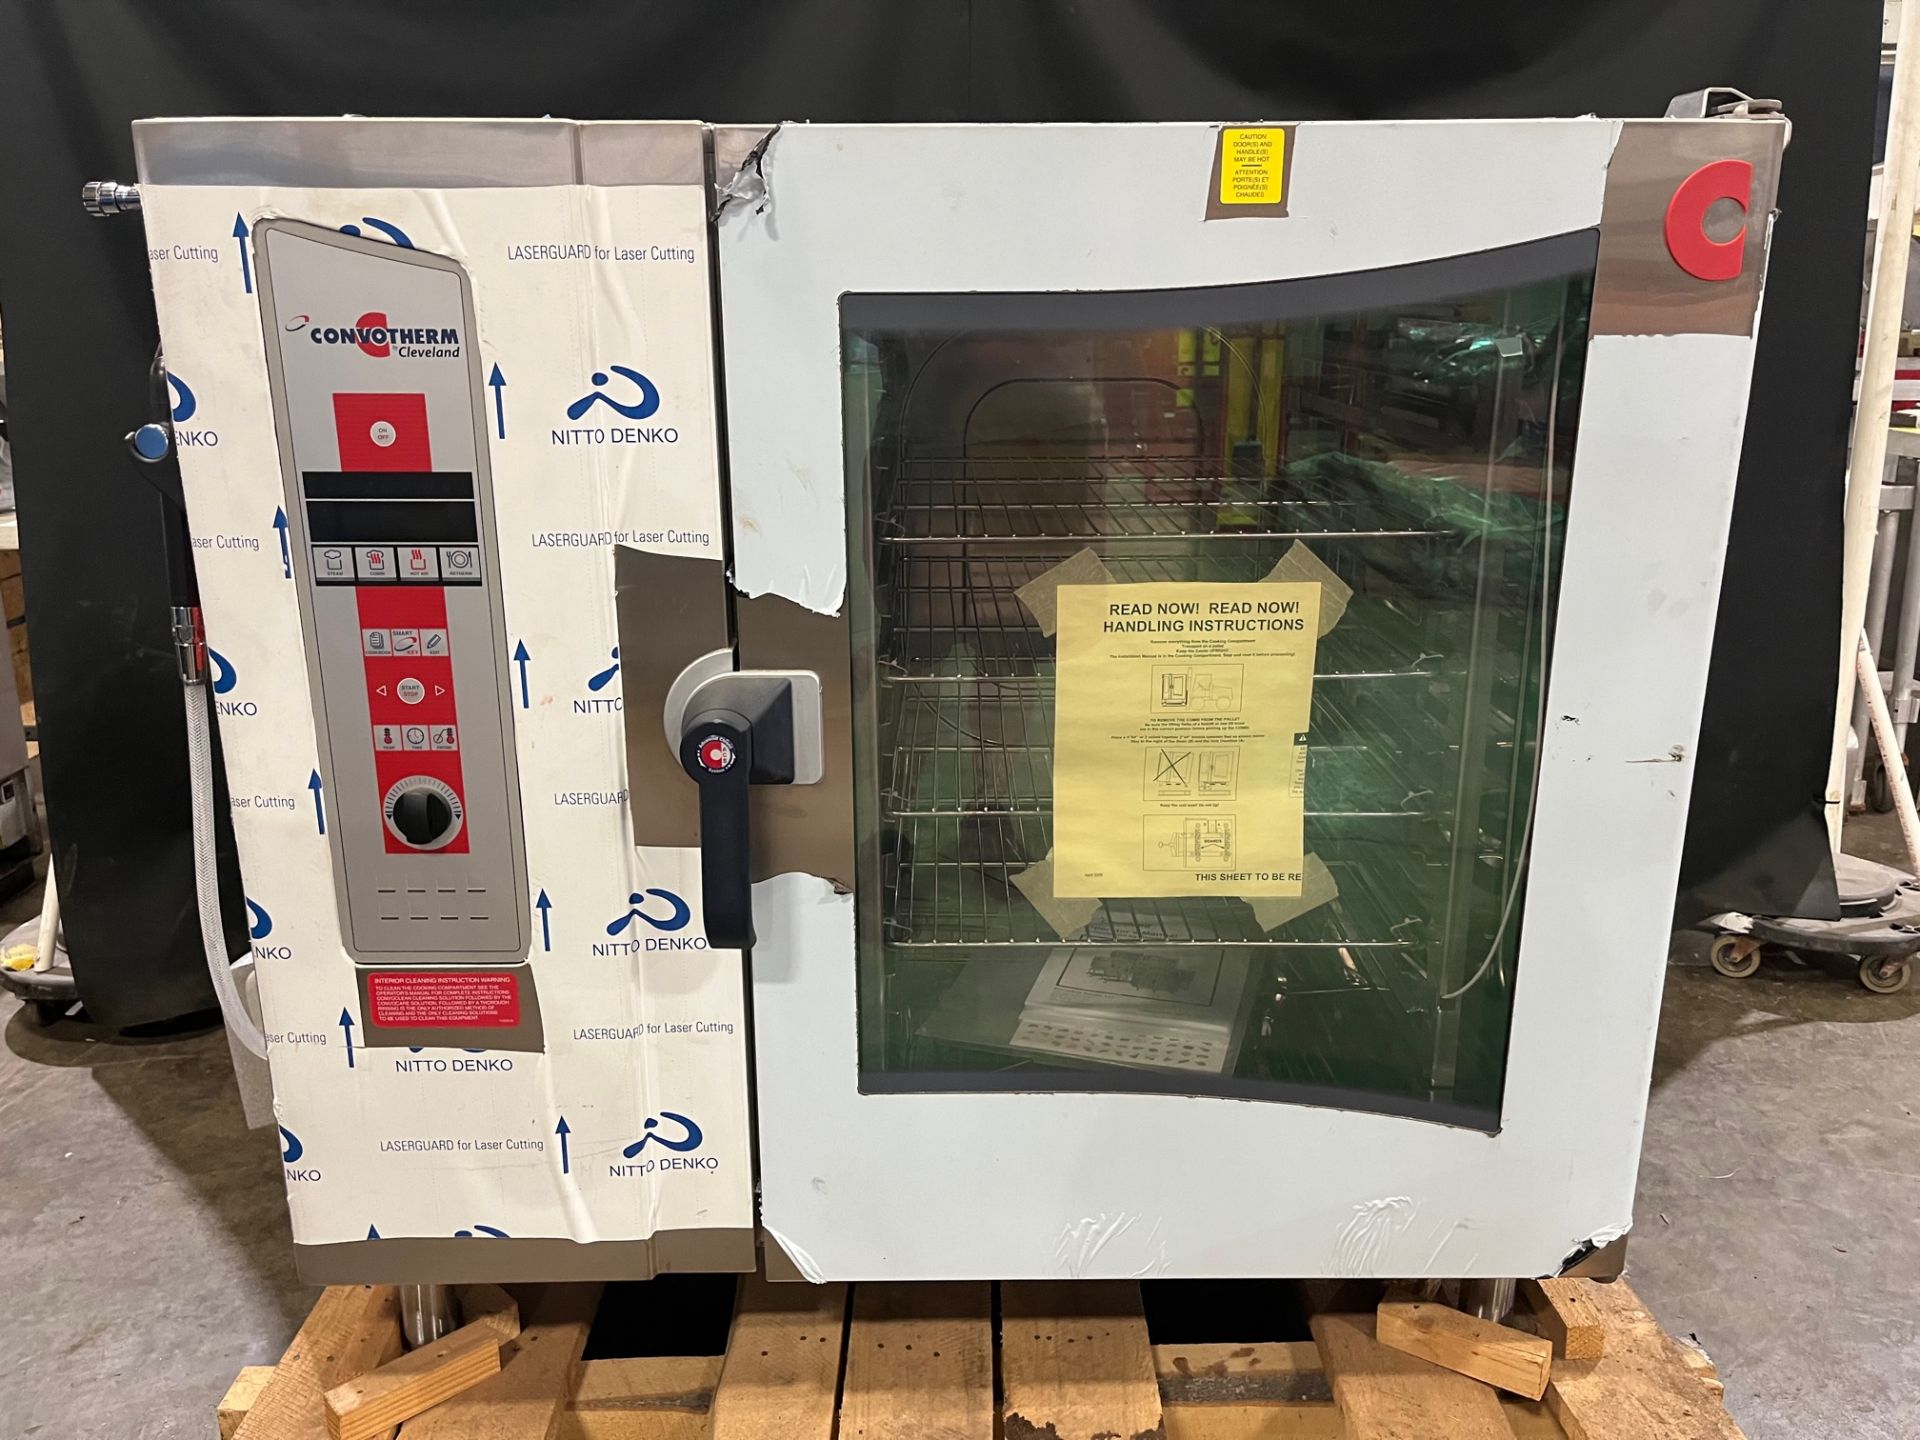 "NEW" Cleveland Convotherm 10.2 Series, model no. 0ES-10.2, 208/240 , 3 phase